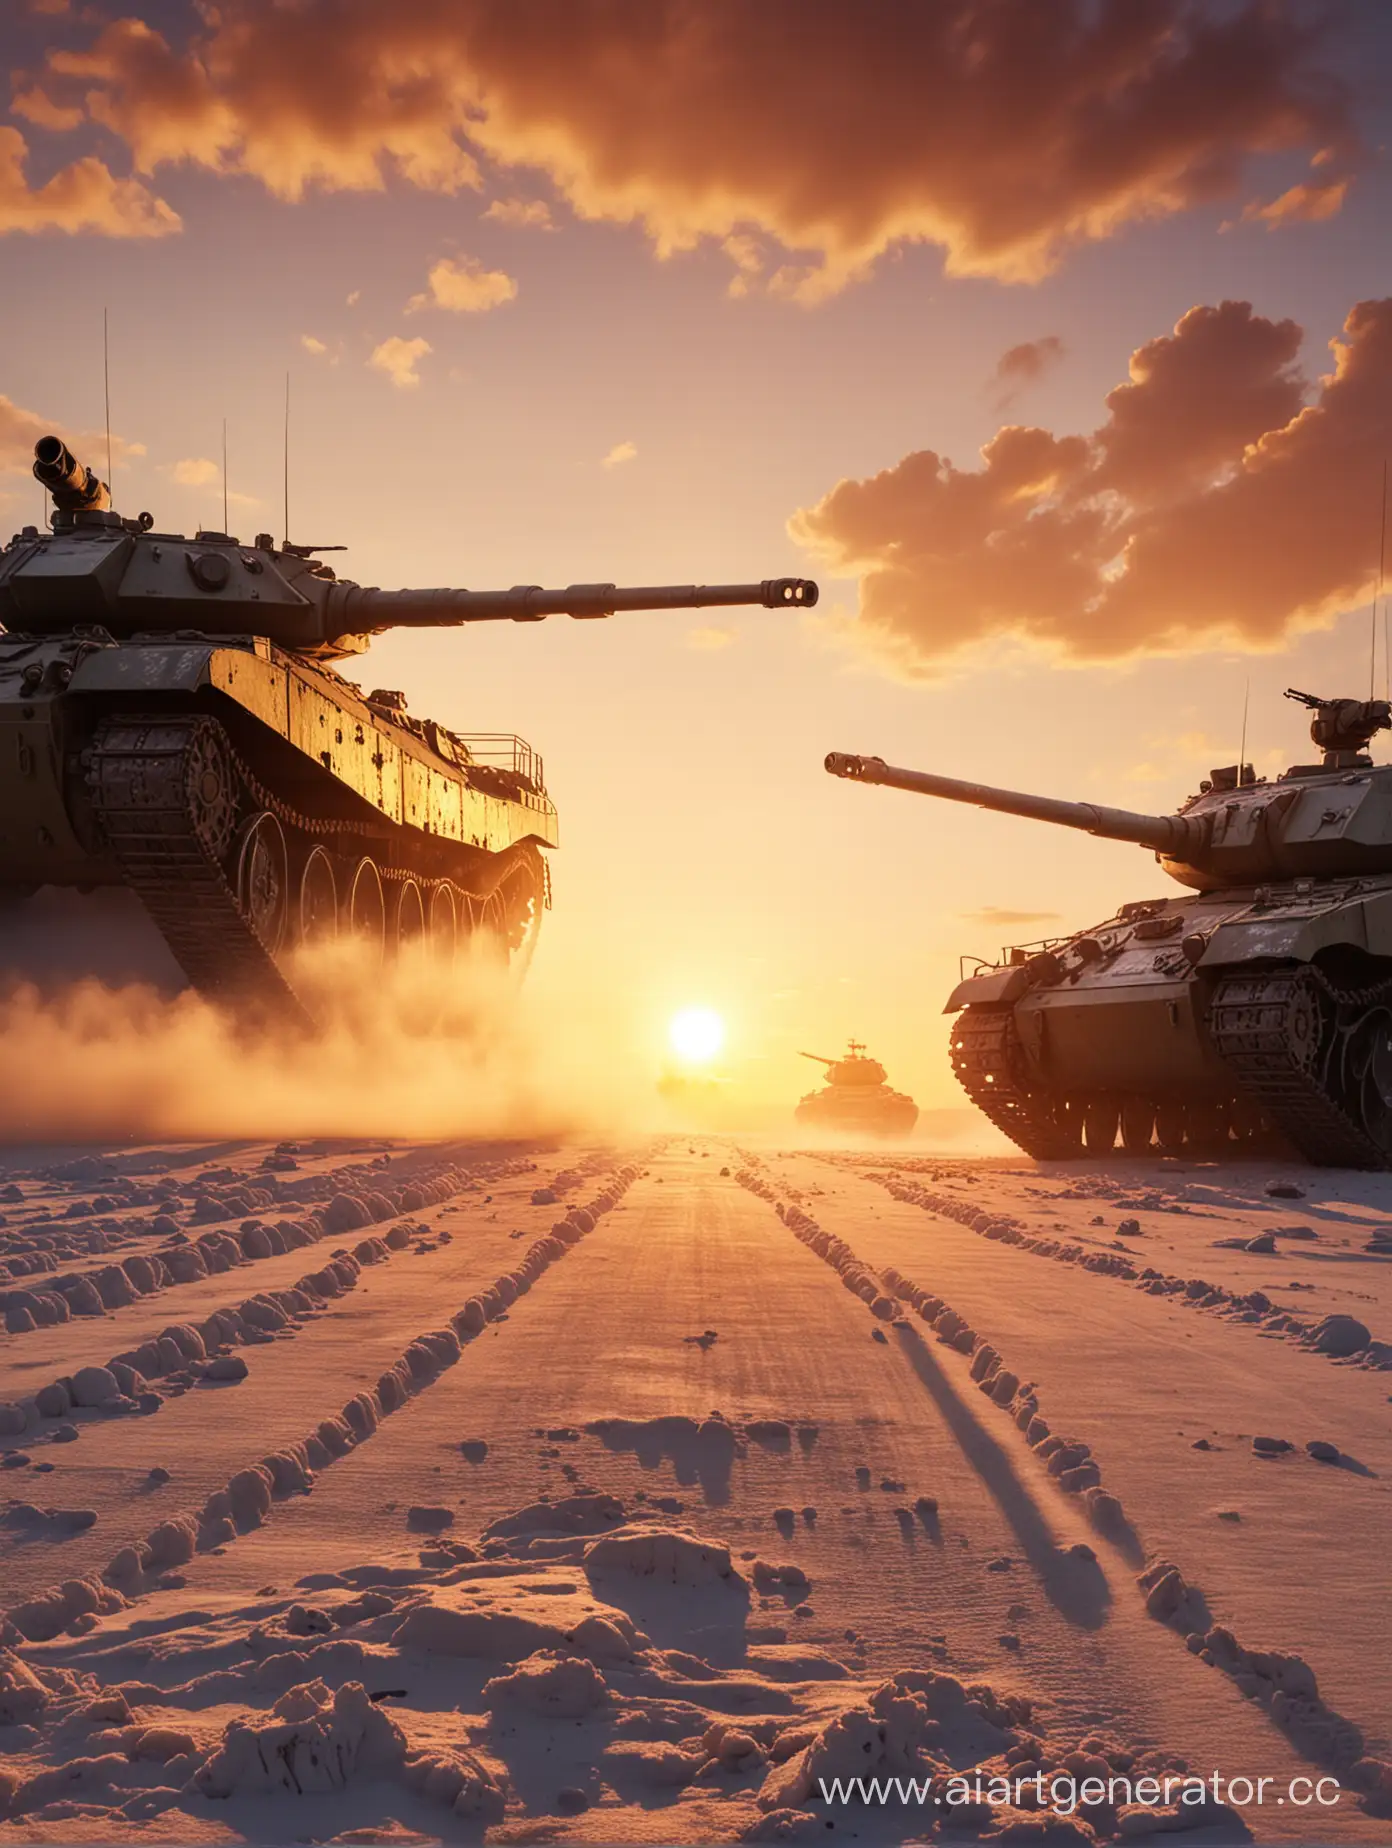 Future-Confrontation-USSR-and-USA-Tanks-Face-Off-at-Sunset-in-4K